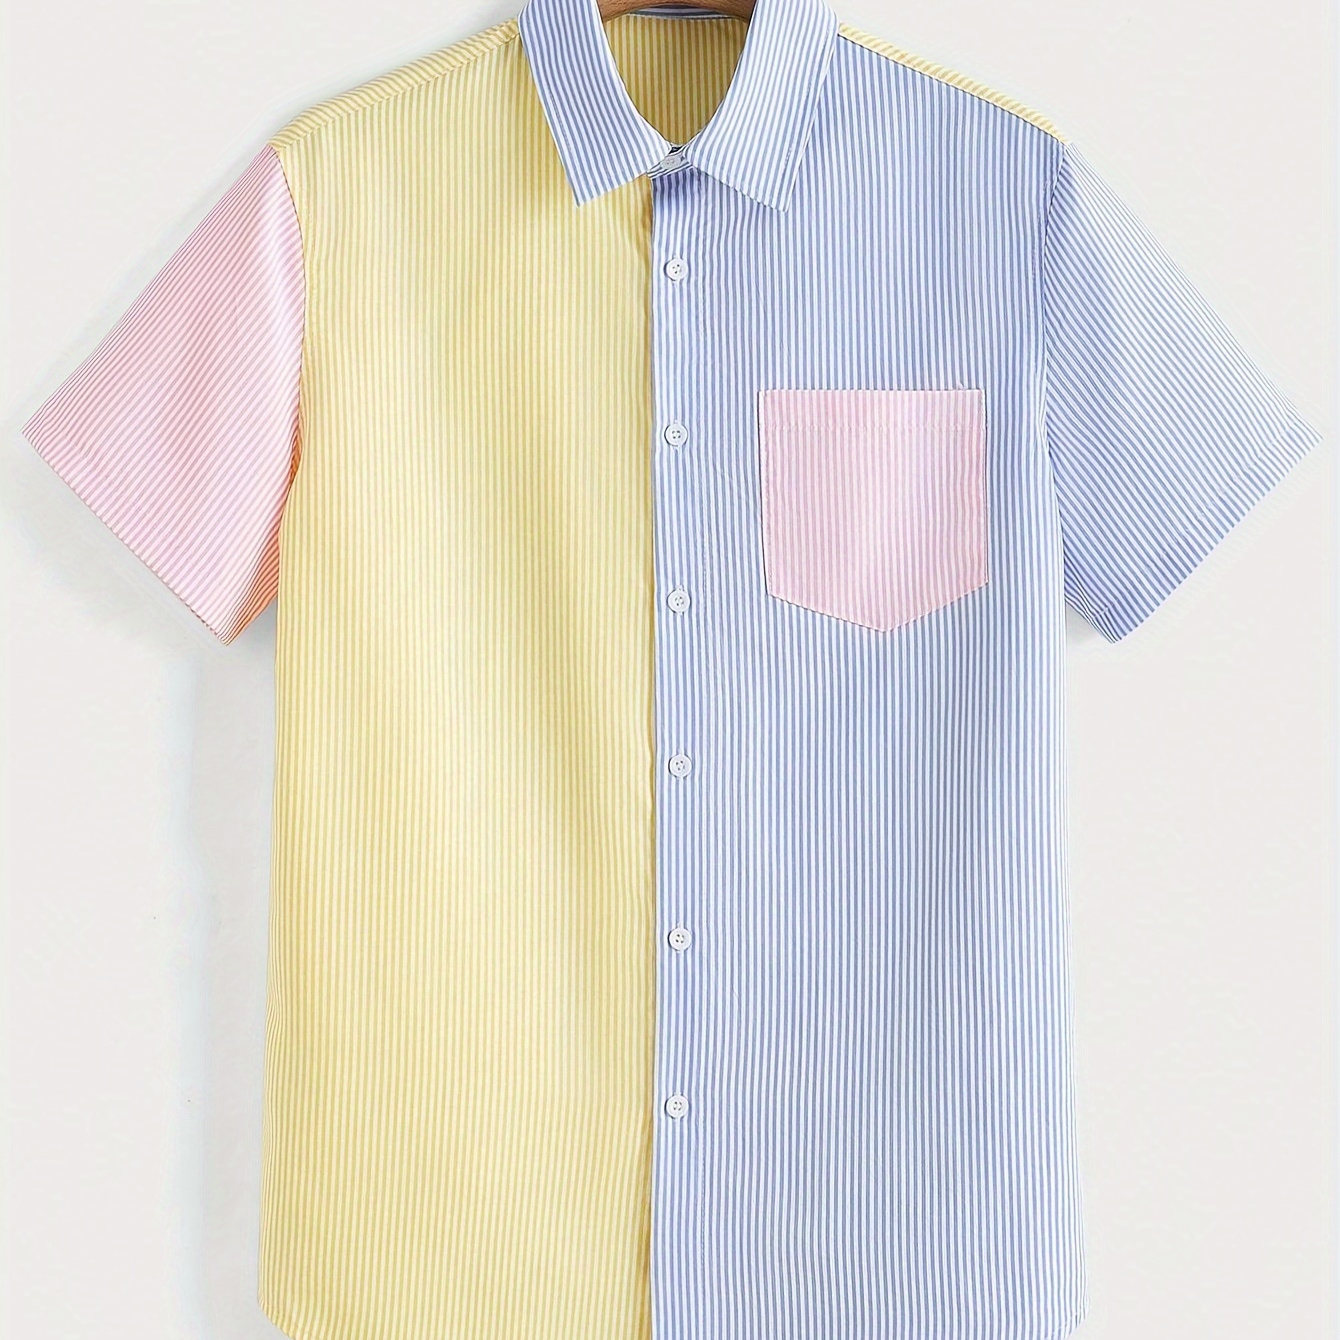 

Men's Fashion Striped Shirt With Color Block Design, Casual Short-sleeve Button Up Shirt, Trendy Summer Shirt For Vacation And Casual Wear